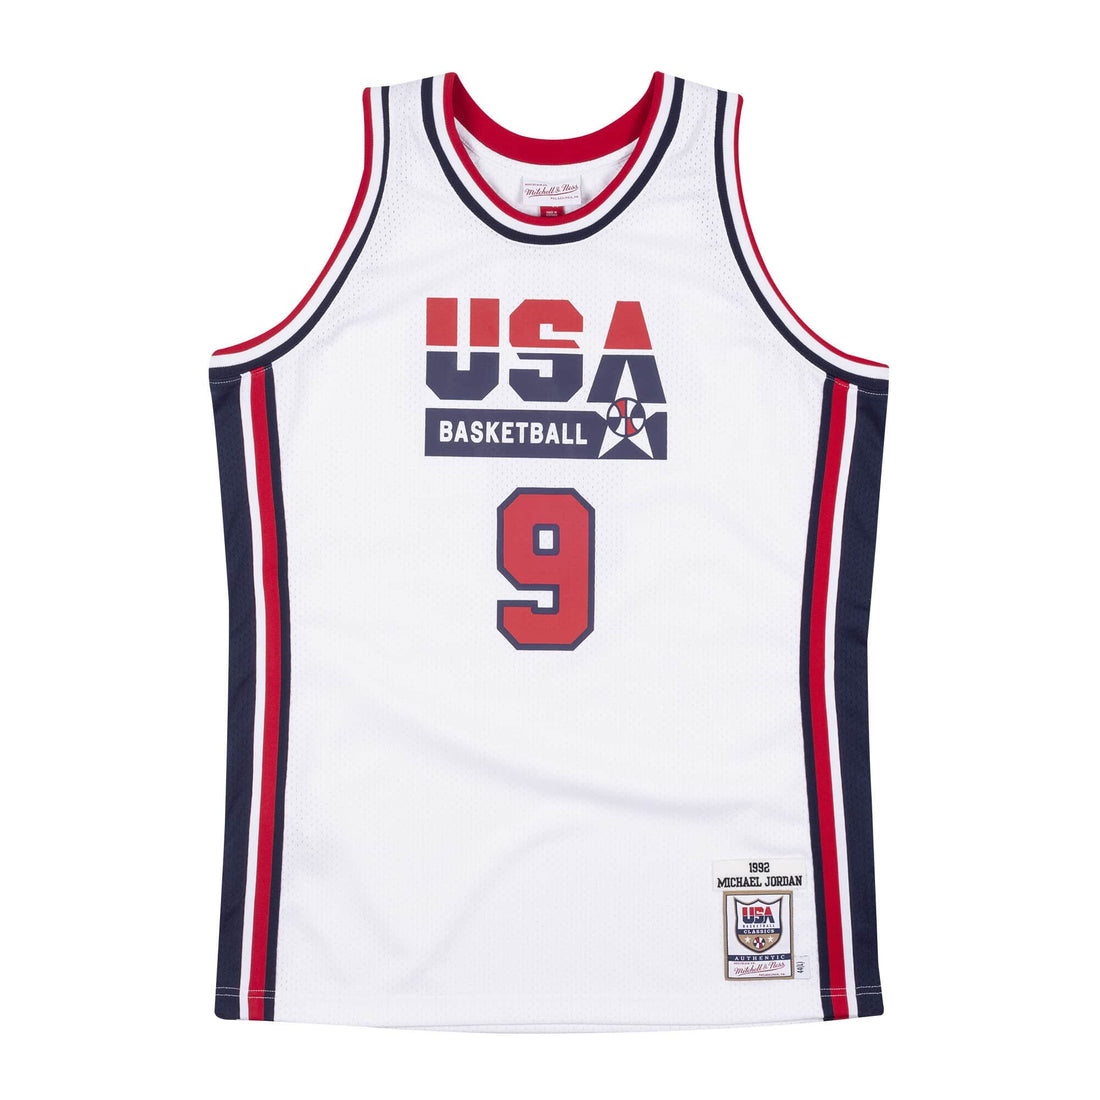 Mitchell & Ness Is Bringing Back the Jersey From Michael